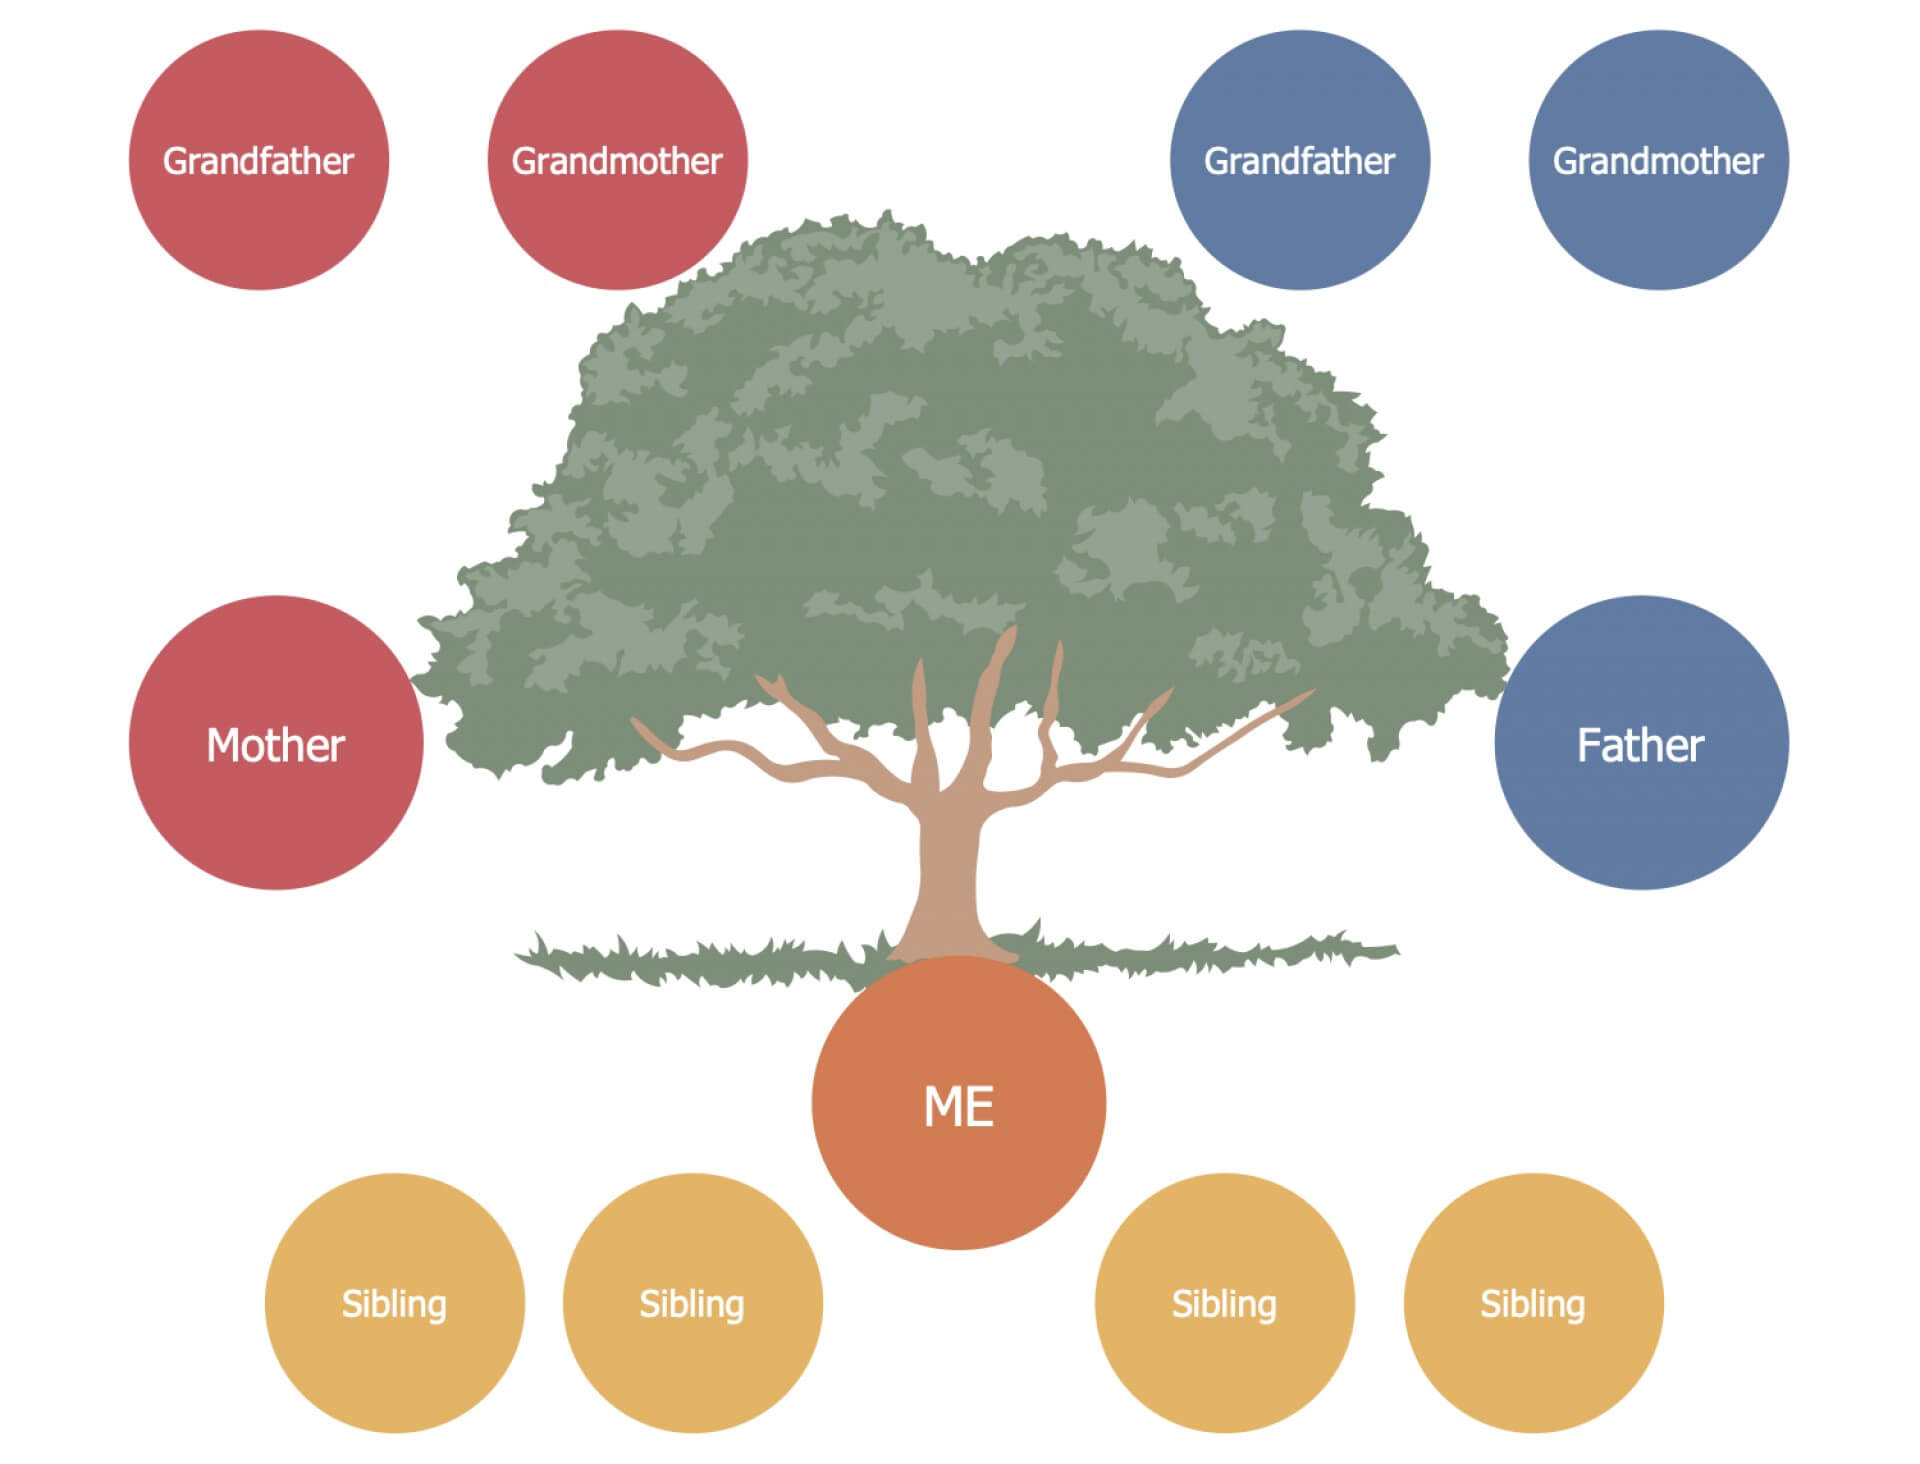 013 Family Tree Drawing Simple Template Breathtaking Ideas With 3 Generation Family Tree Template Word